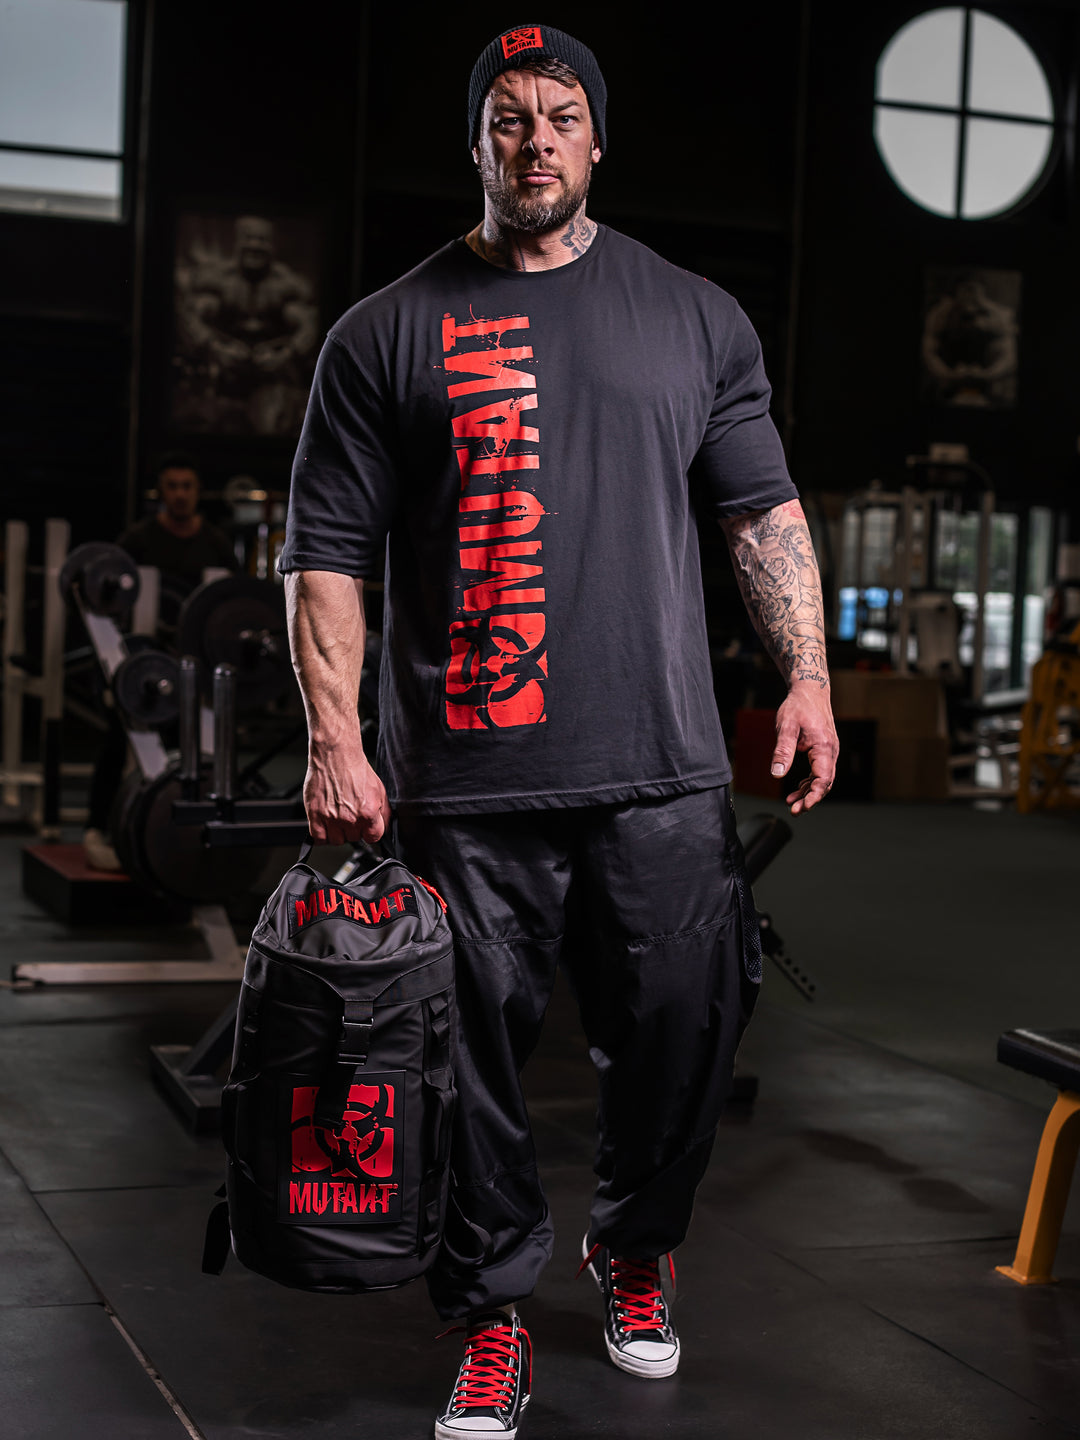 Jamie Christian, the MUTANT GIANT, at the gym holding the top strap of the black Military Top Load Duffel Backpack with a red 'MUTANT' logo.